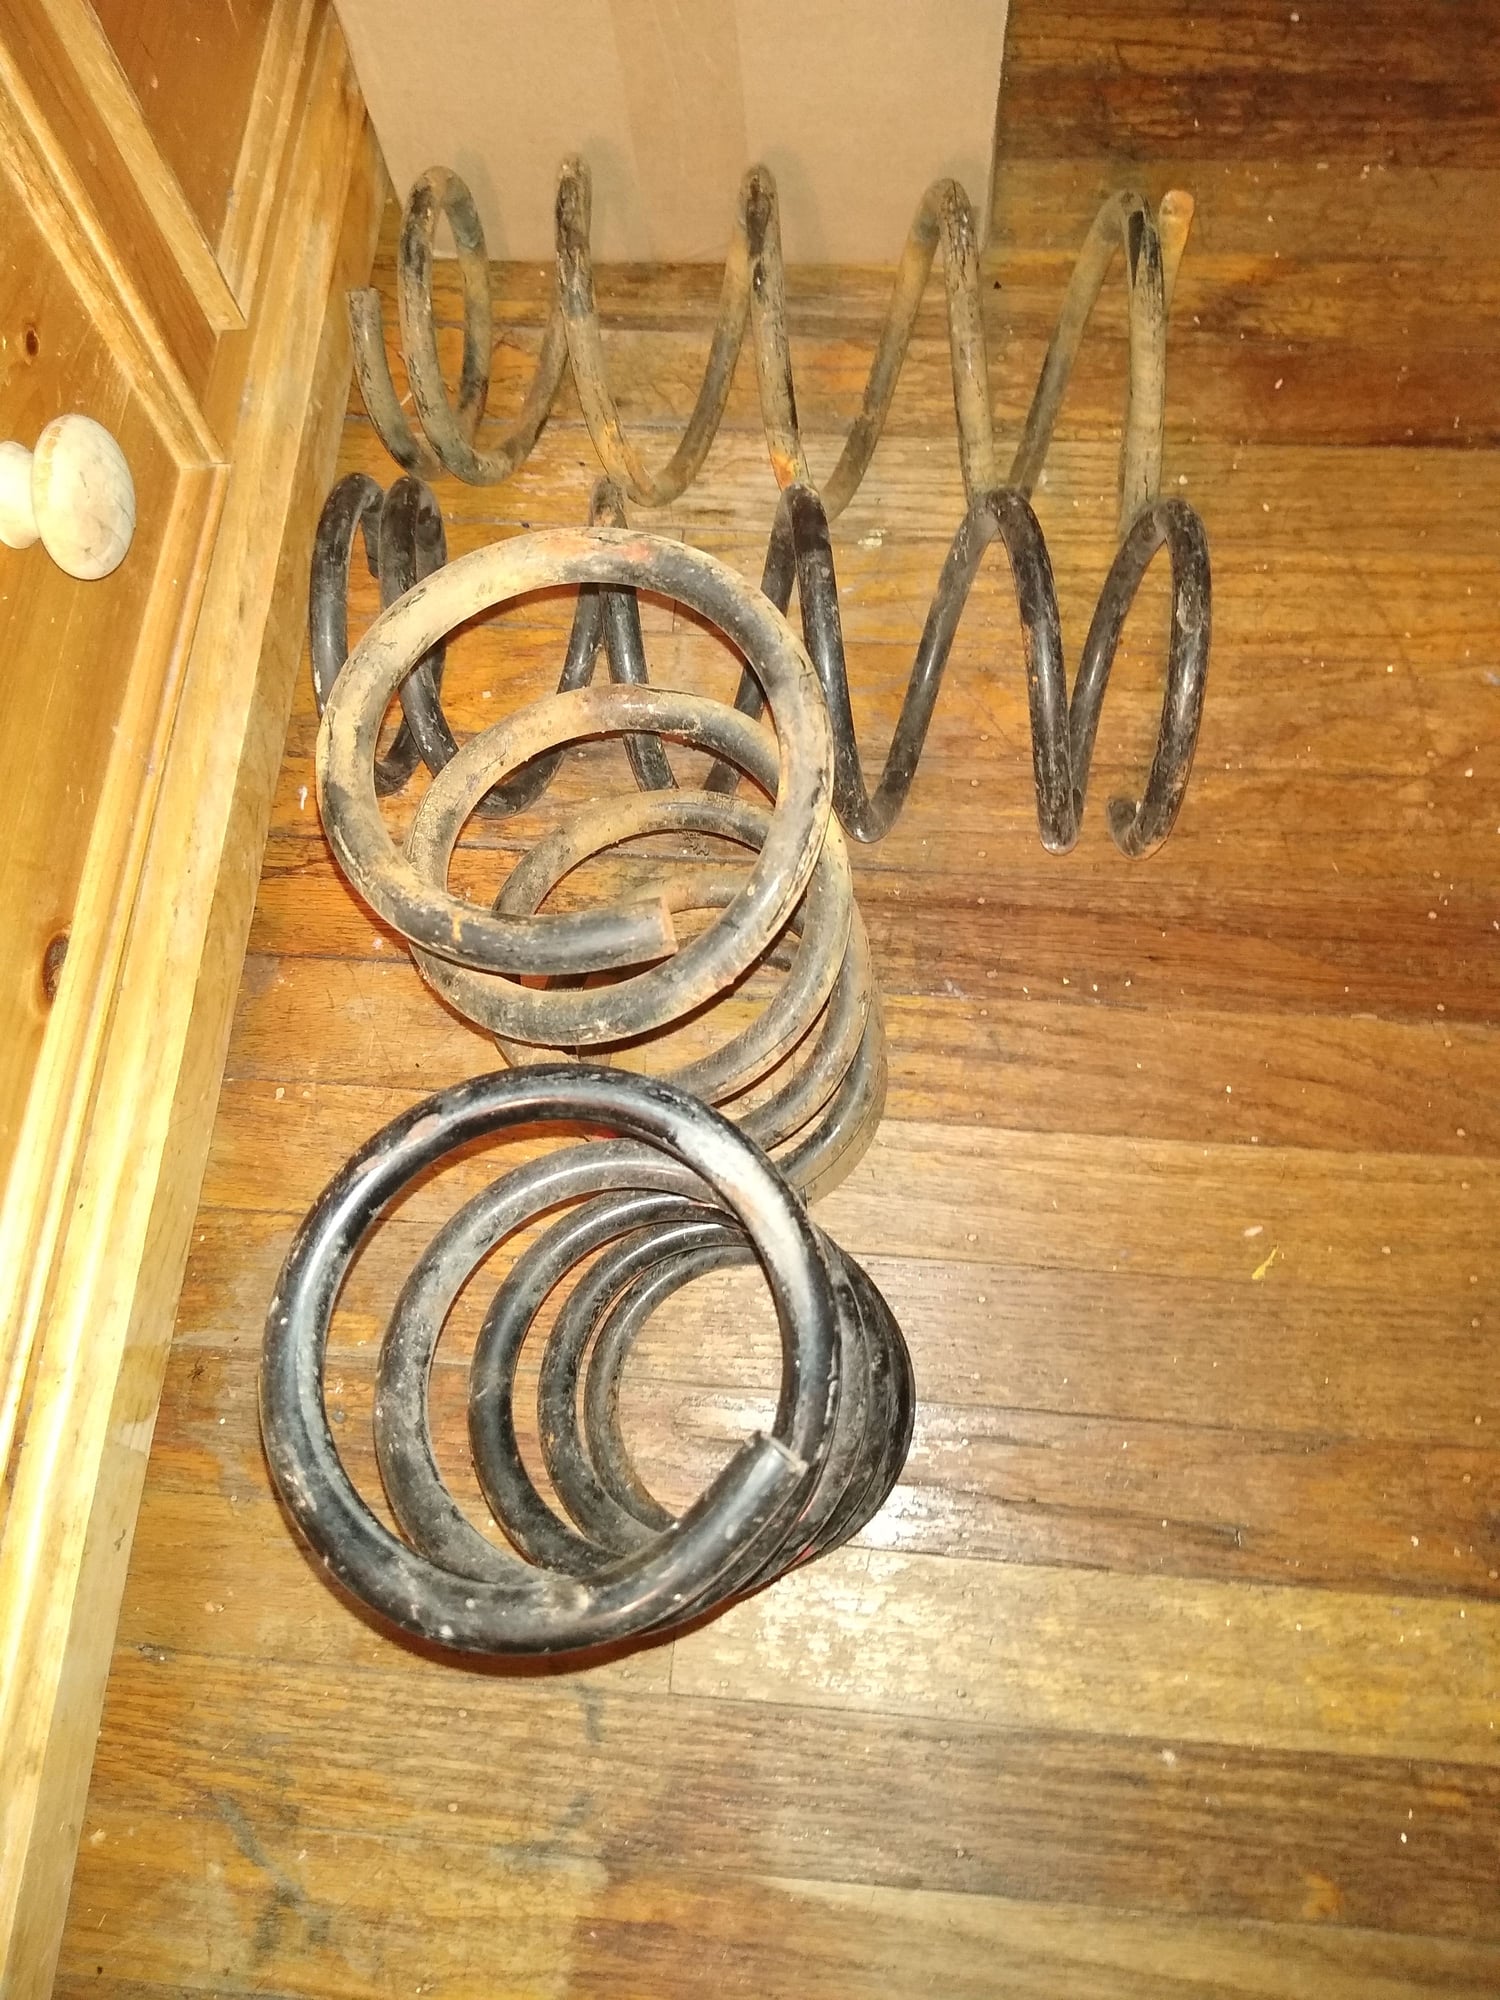 Steering/Suspension - FD - OEM Stock Coil Springs - Used - 1993 to 1995 Mazda RX-7 - San Jose, CA 95121, United States